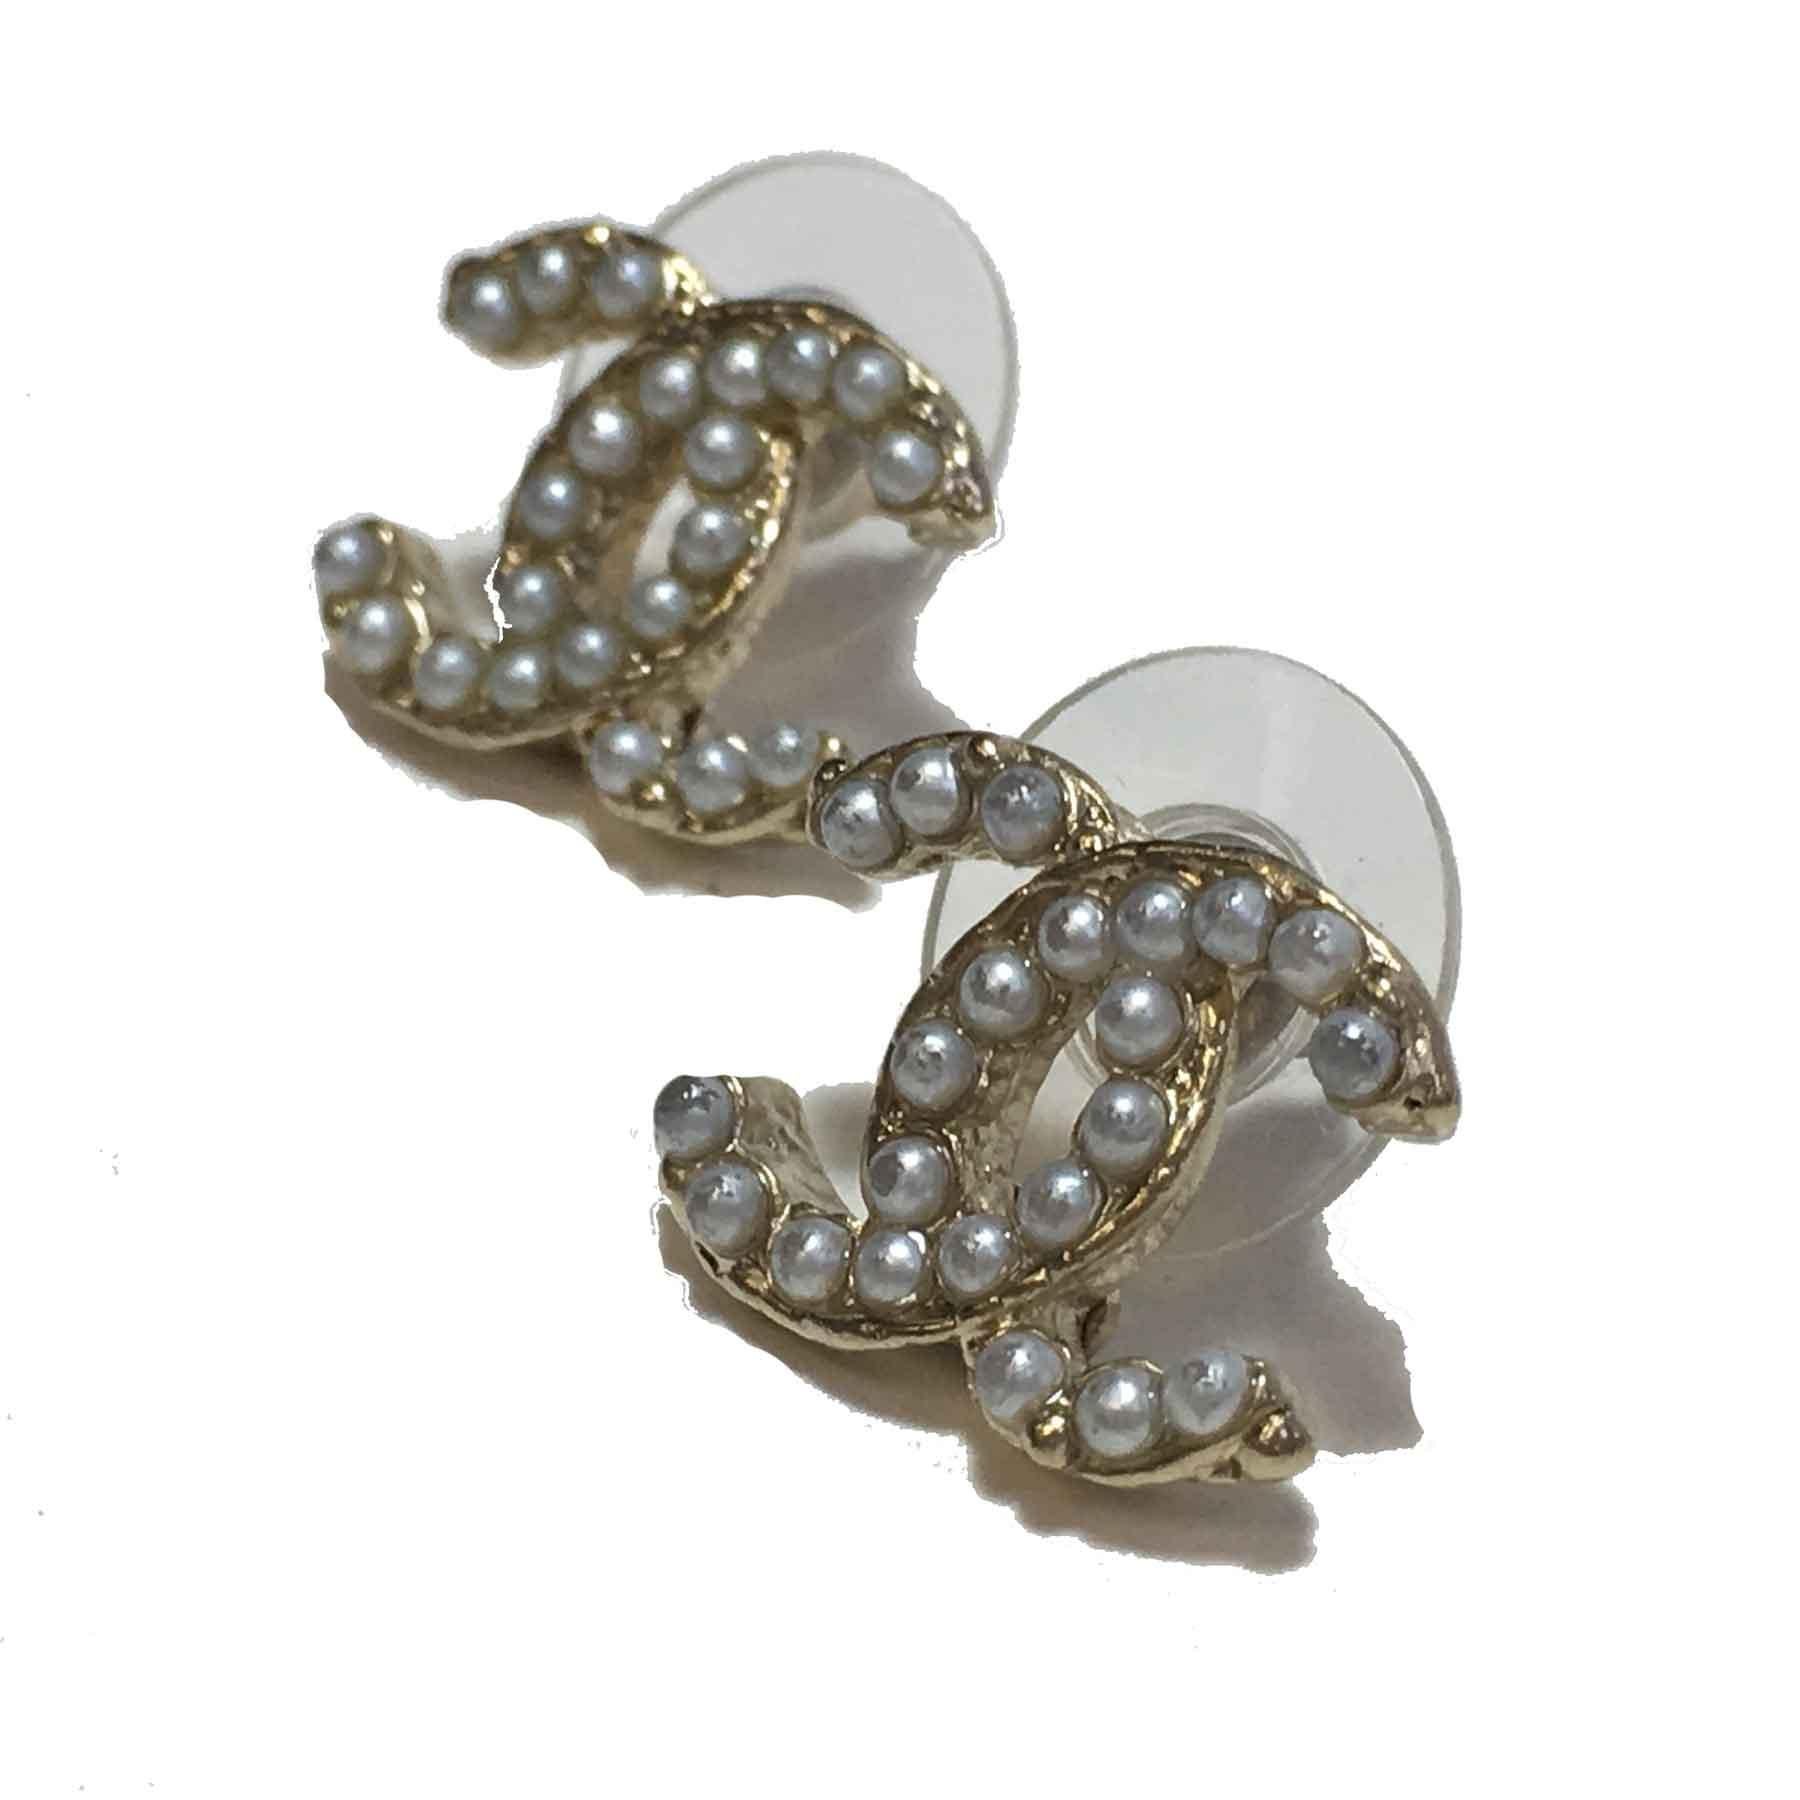 CC gold stud earrings set with pearl beads. The pearly pearls have for some lost their mother of pearl but it is only seen very closely. The ear studs bear the Chanel stamp of the Fall / Winter 2013 Collection. 
The dimensions are: length: 1.5 x